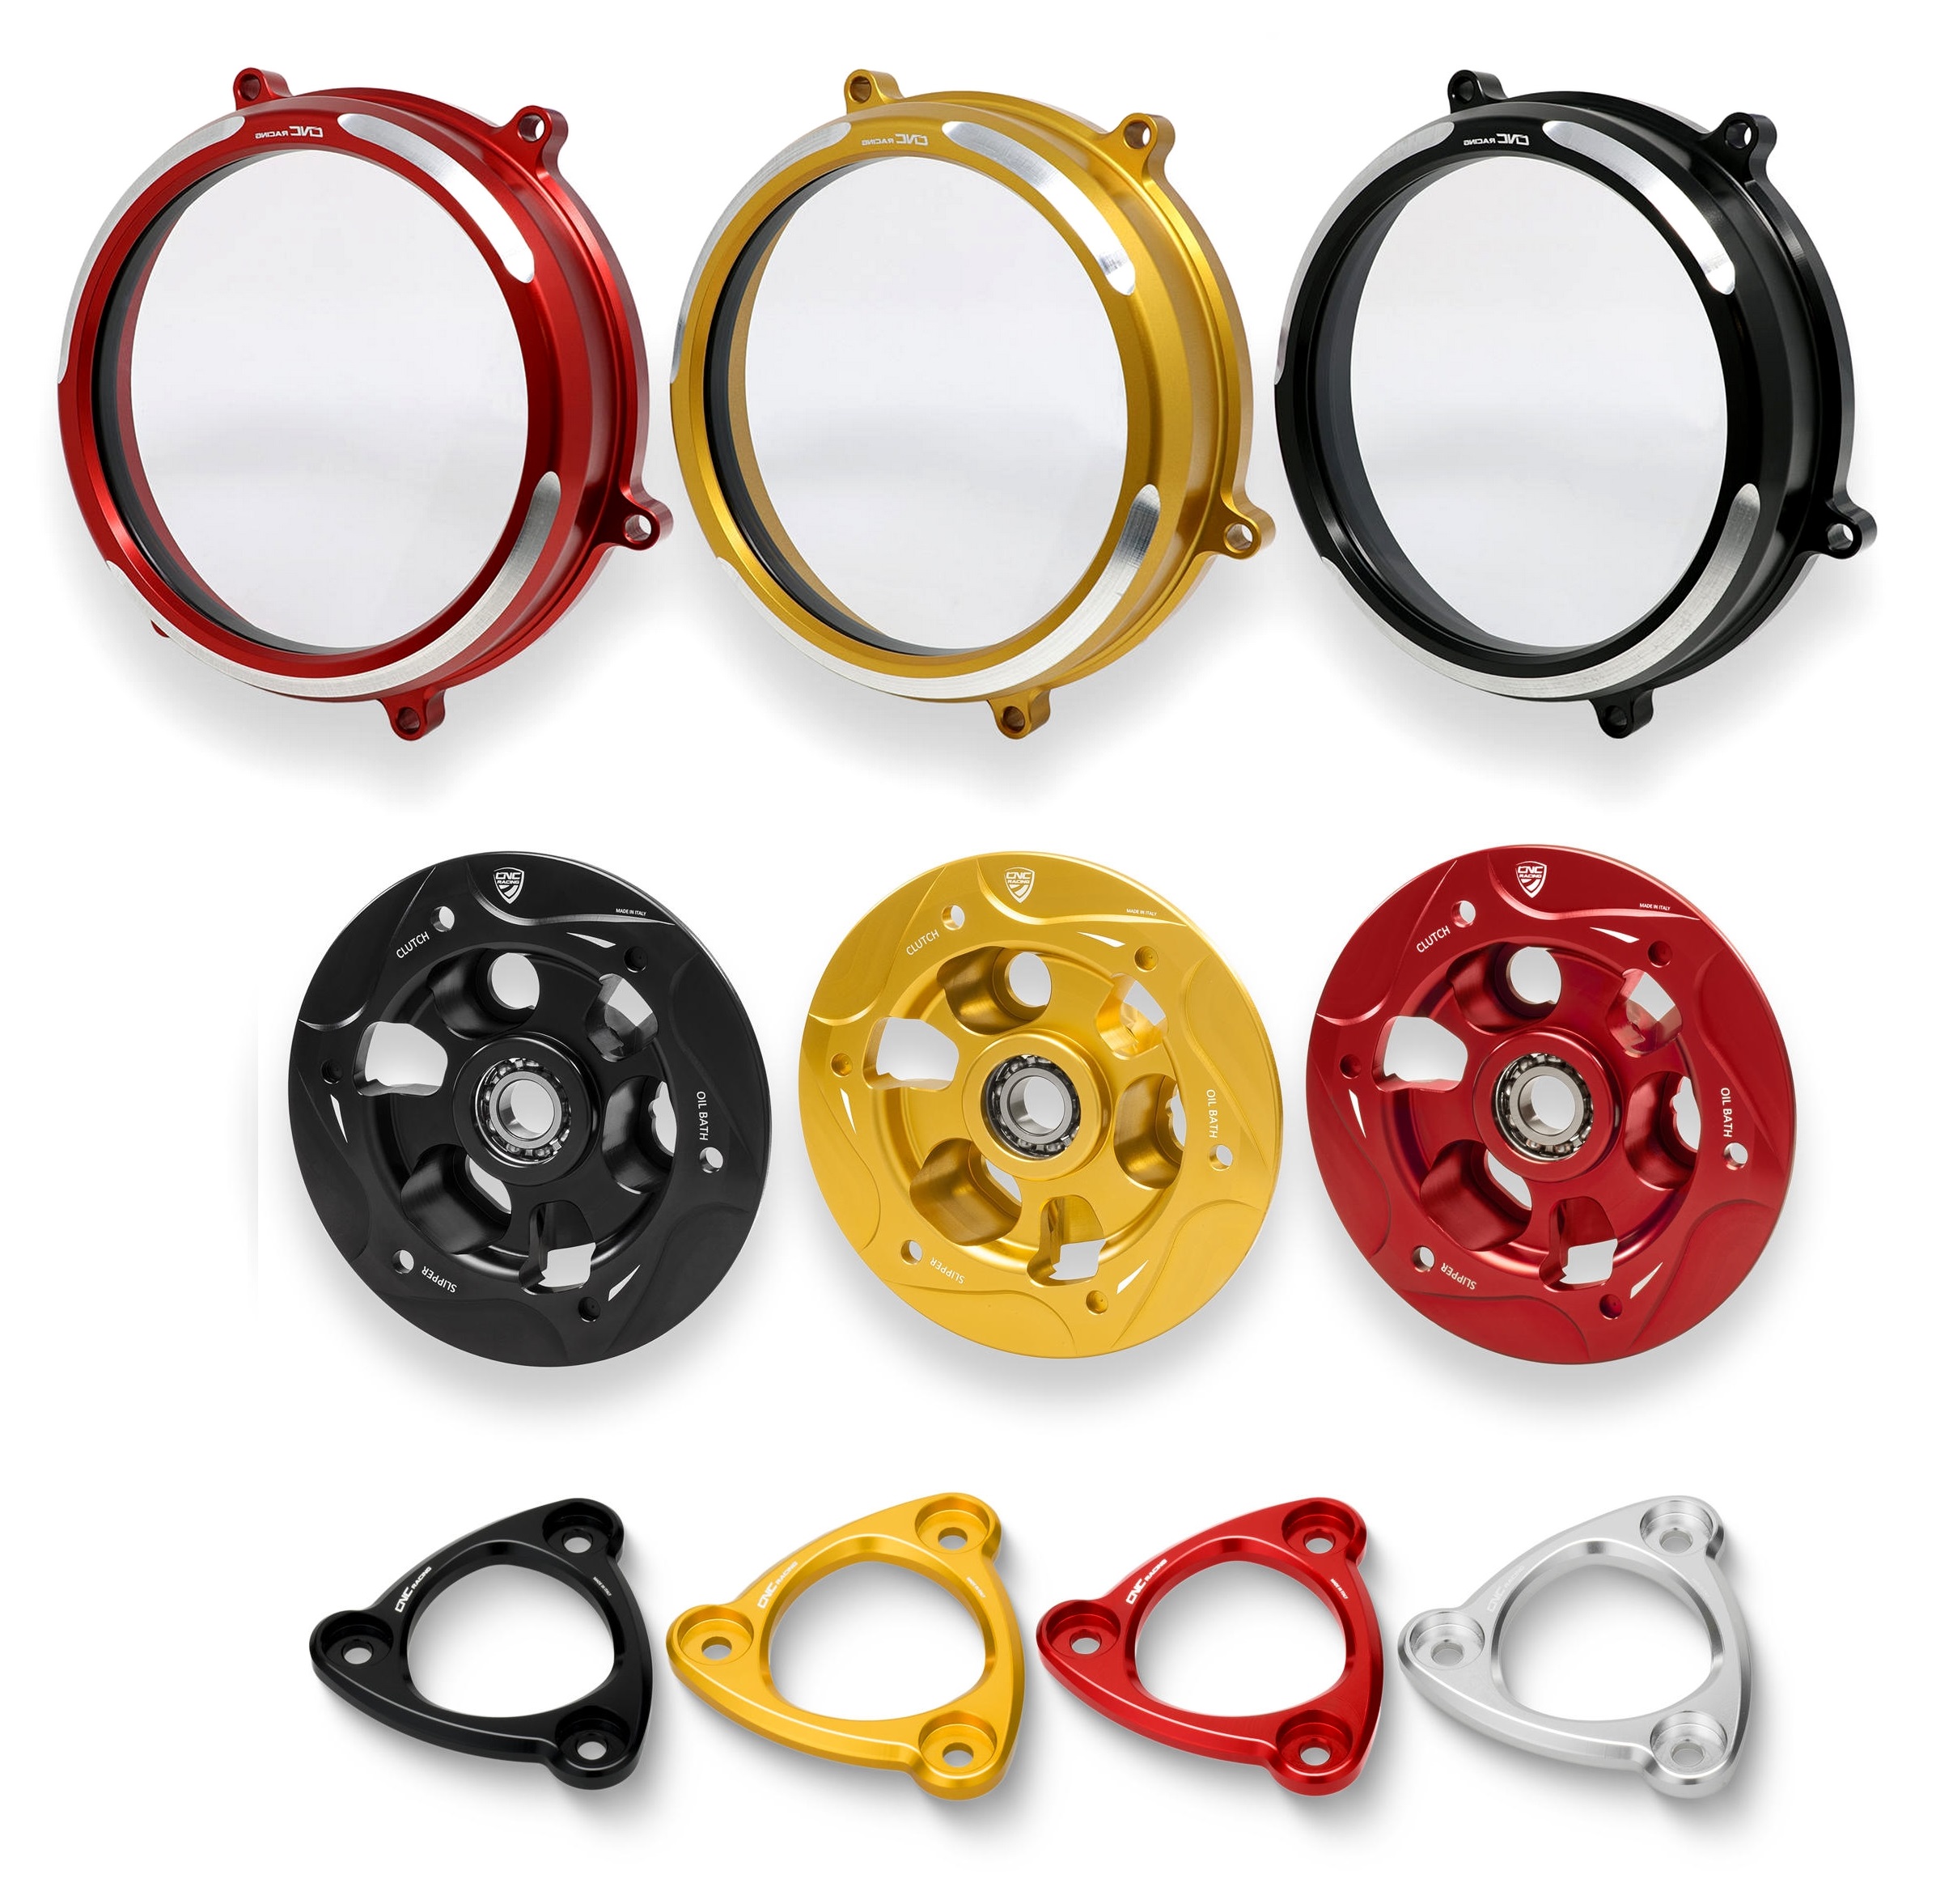 KIT PLEXIGLASS CARBON CLUTCH CLEAR COVER CNC RACING FOR DUCATI PANIGALE 1199 - 1299 - 959 - CA200S+SP200+SF200